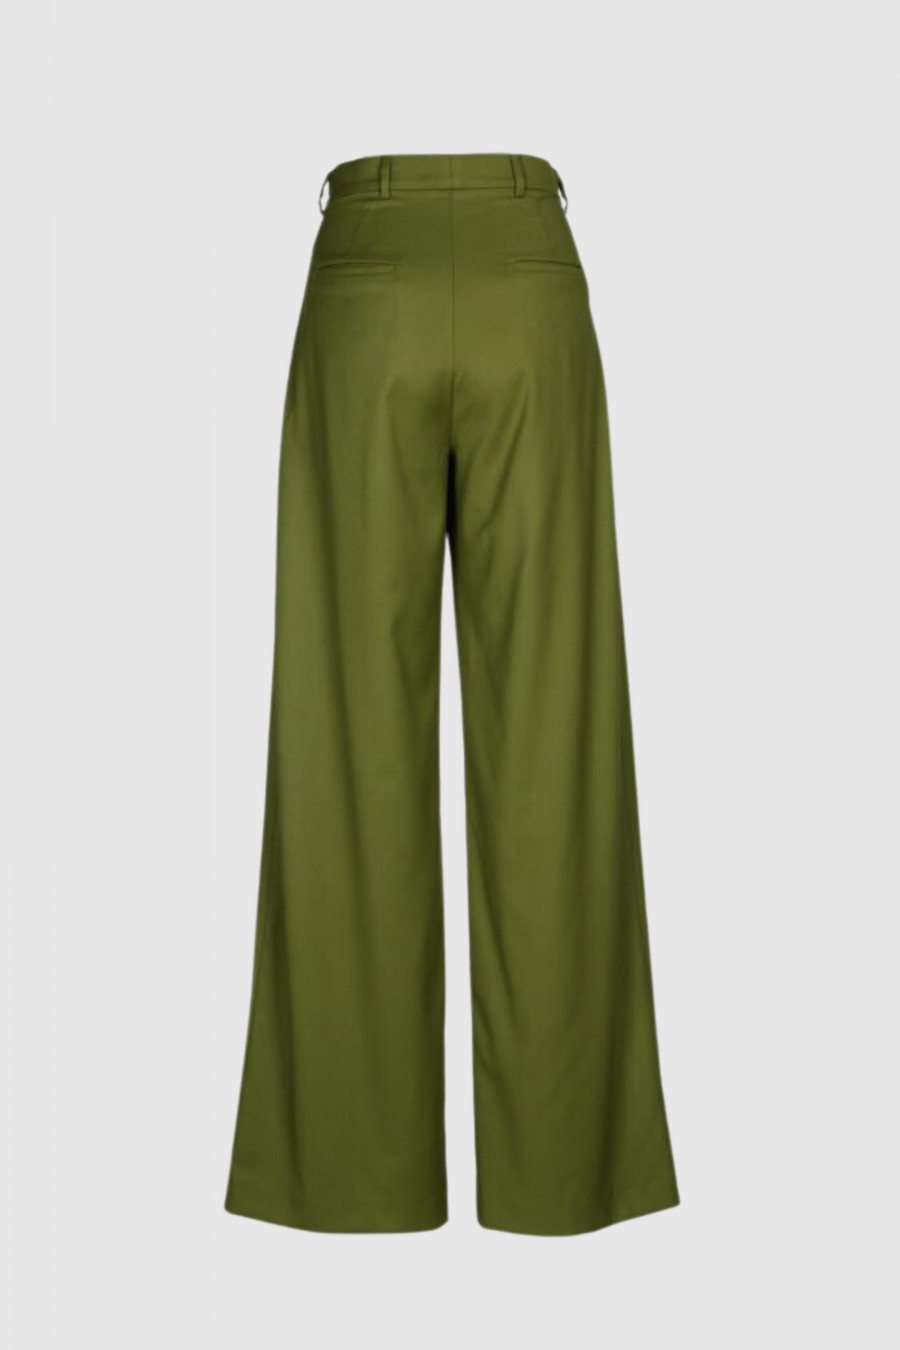 High rise trousers in a Turtle Green blend